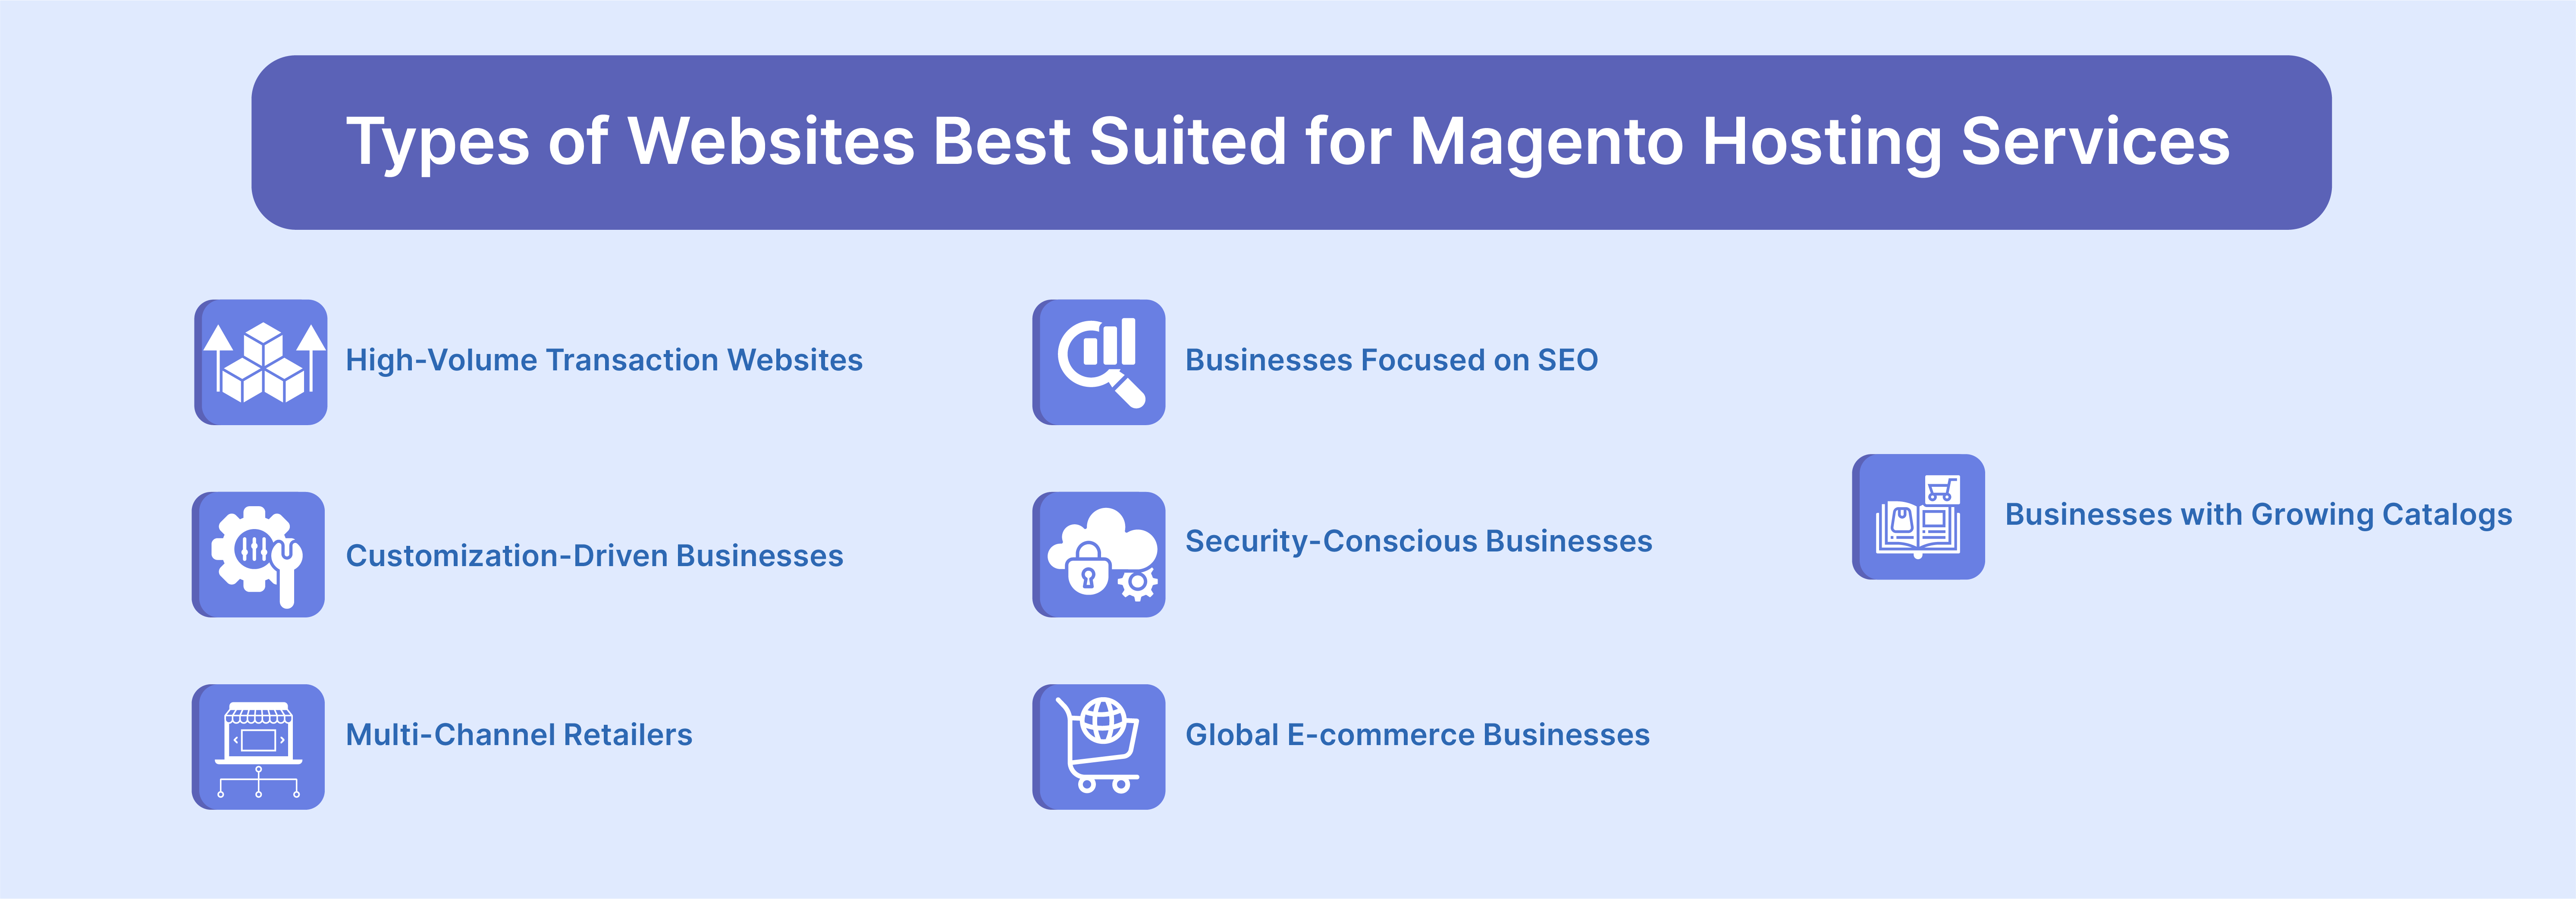 Identifying types of websites that benefit most from Magento hosting services